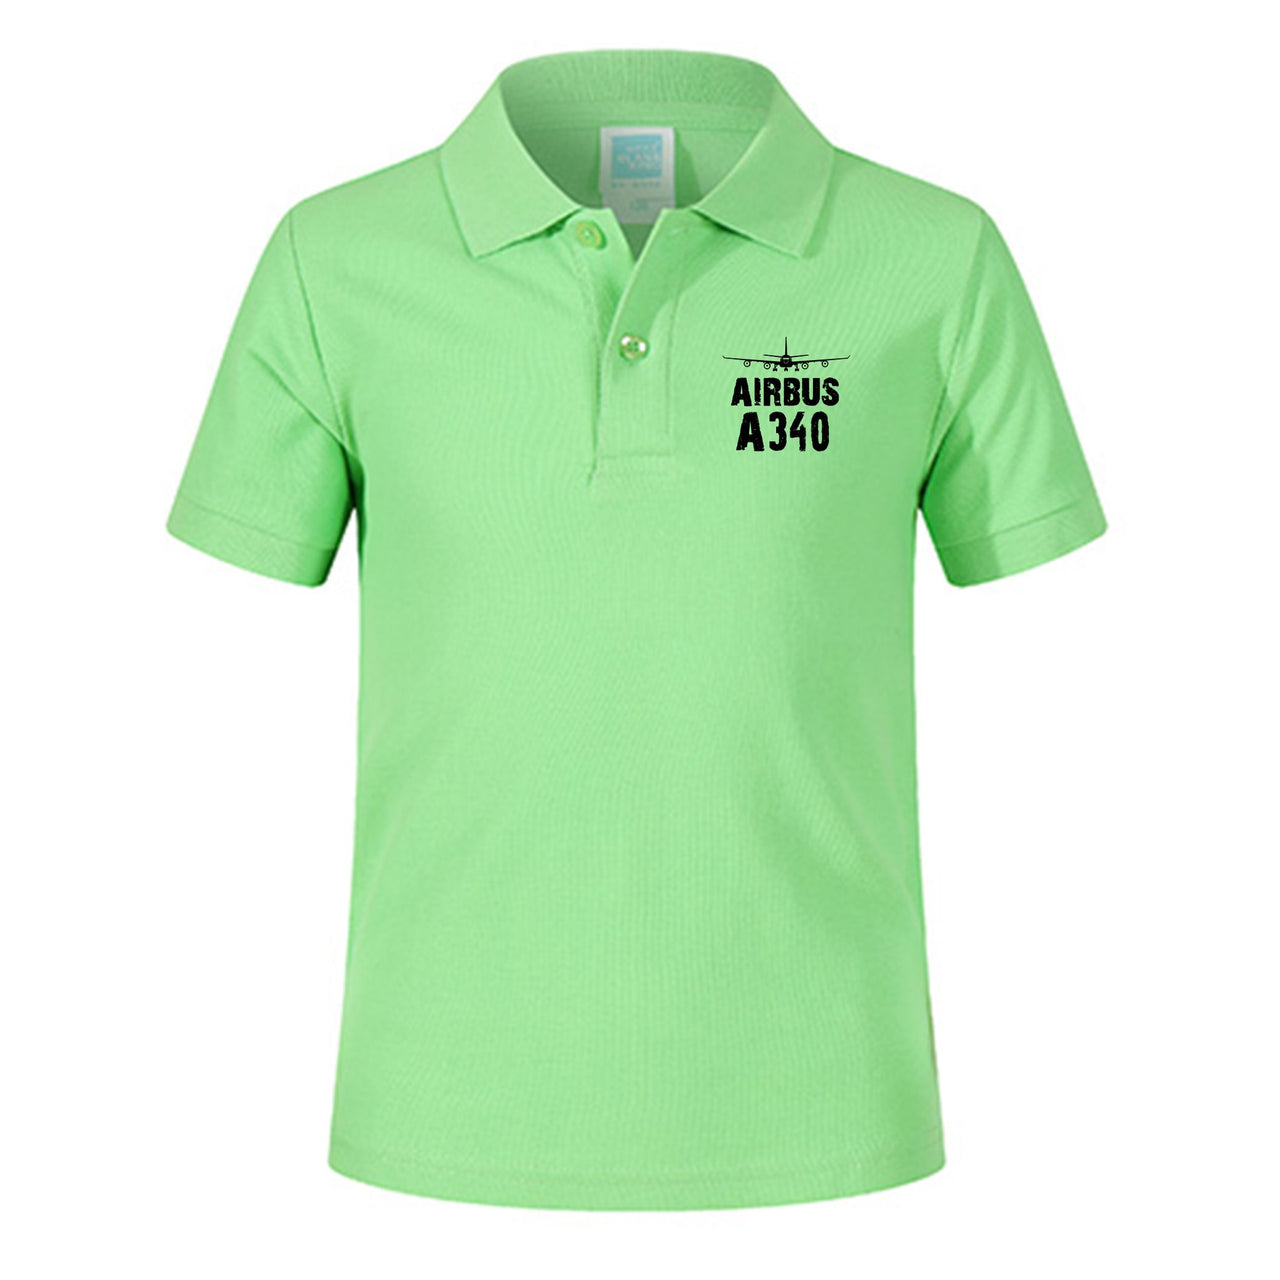 Airbus A340 & Plane Designed Children Polo T-Shirts